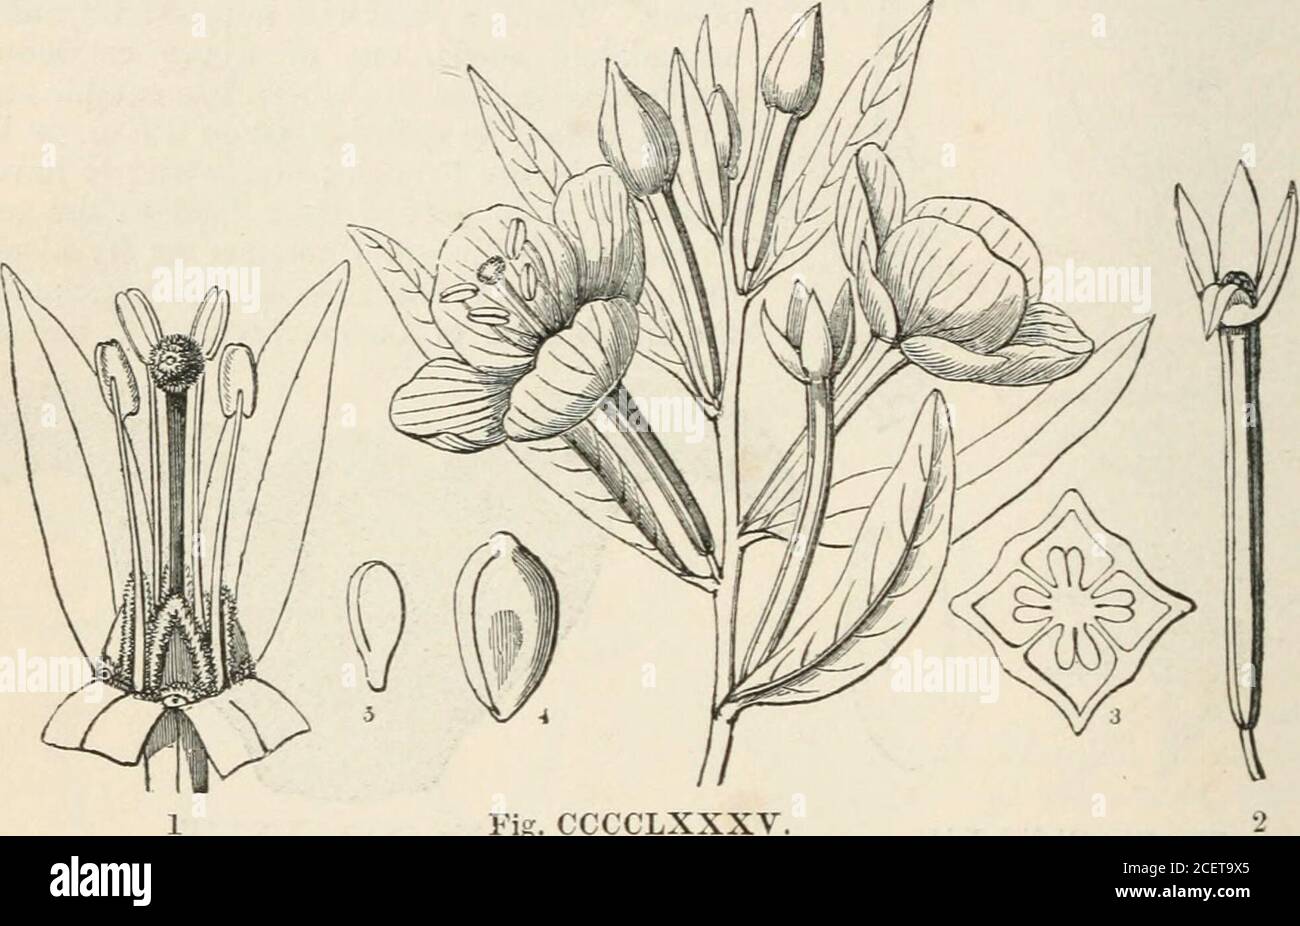 . The vegetable kingdom : or, The structure, classification, and uses of plants, illustrated upon the natural system. se.—Haloragace^.- Fig. CCCCLXXXIII.—Hippuris vulgaris. 1. a complete flower;the position of the ovale; 3. a section of the ripe fruit and seed.Fig. CCCCLXXXIV.—Fruit of Trapa bicornis. 2. a section of the pistil, showing 3a2 724 ONAGRACE^. [Epigtnous Exogens. Order CCLXXVIII. ONAGRACEiE.—Onagrads. Onagrae, Juss. Gen. 317. (1789) ; Spach. in Ann. Sc. N. 2 Sei: iv. 161.—Epilobiaceae, Vent. Tabl. 3. 307.(1799;.—Onagrarioe, Juss. Ann. Mus. 3.315. (1804) in part.; DC. Prodr. 3. 35. Stock Photo